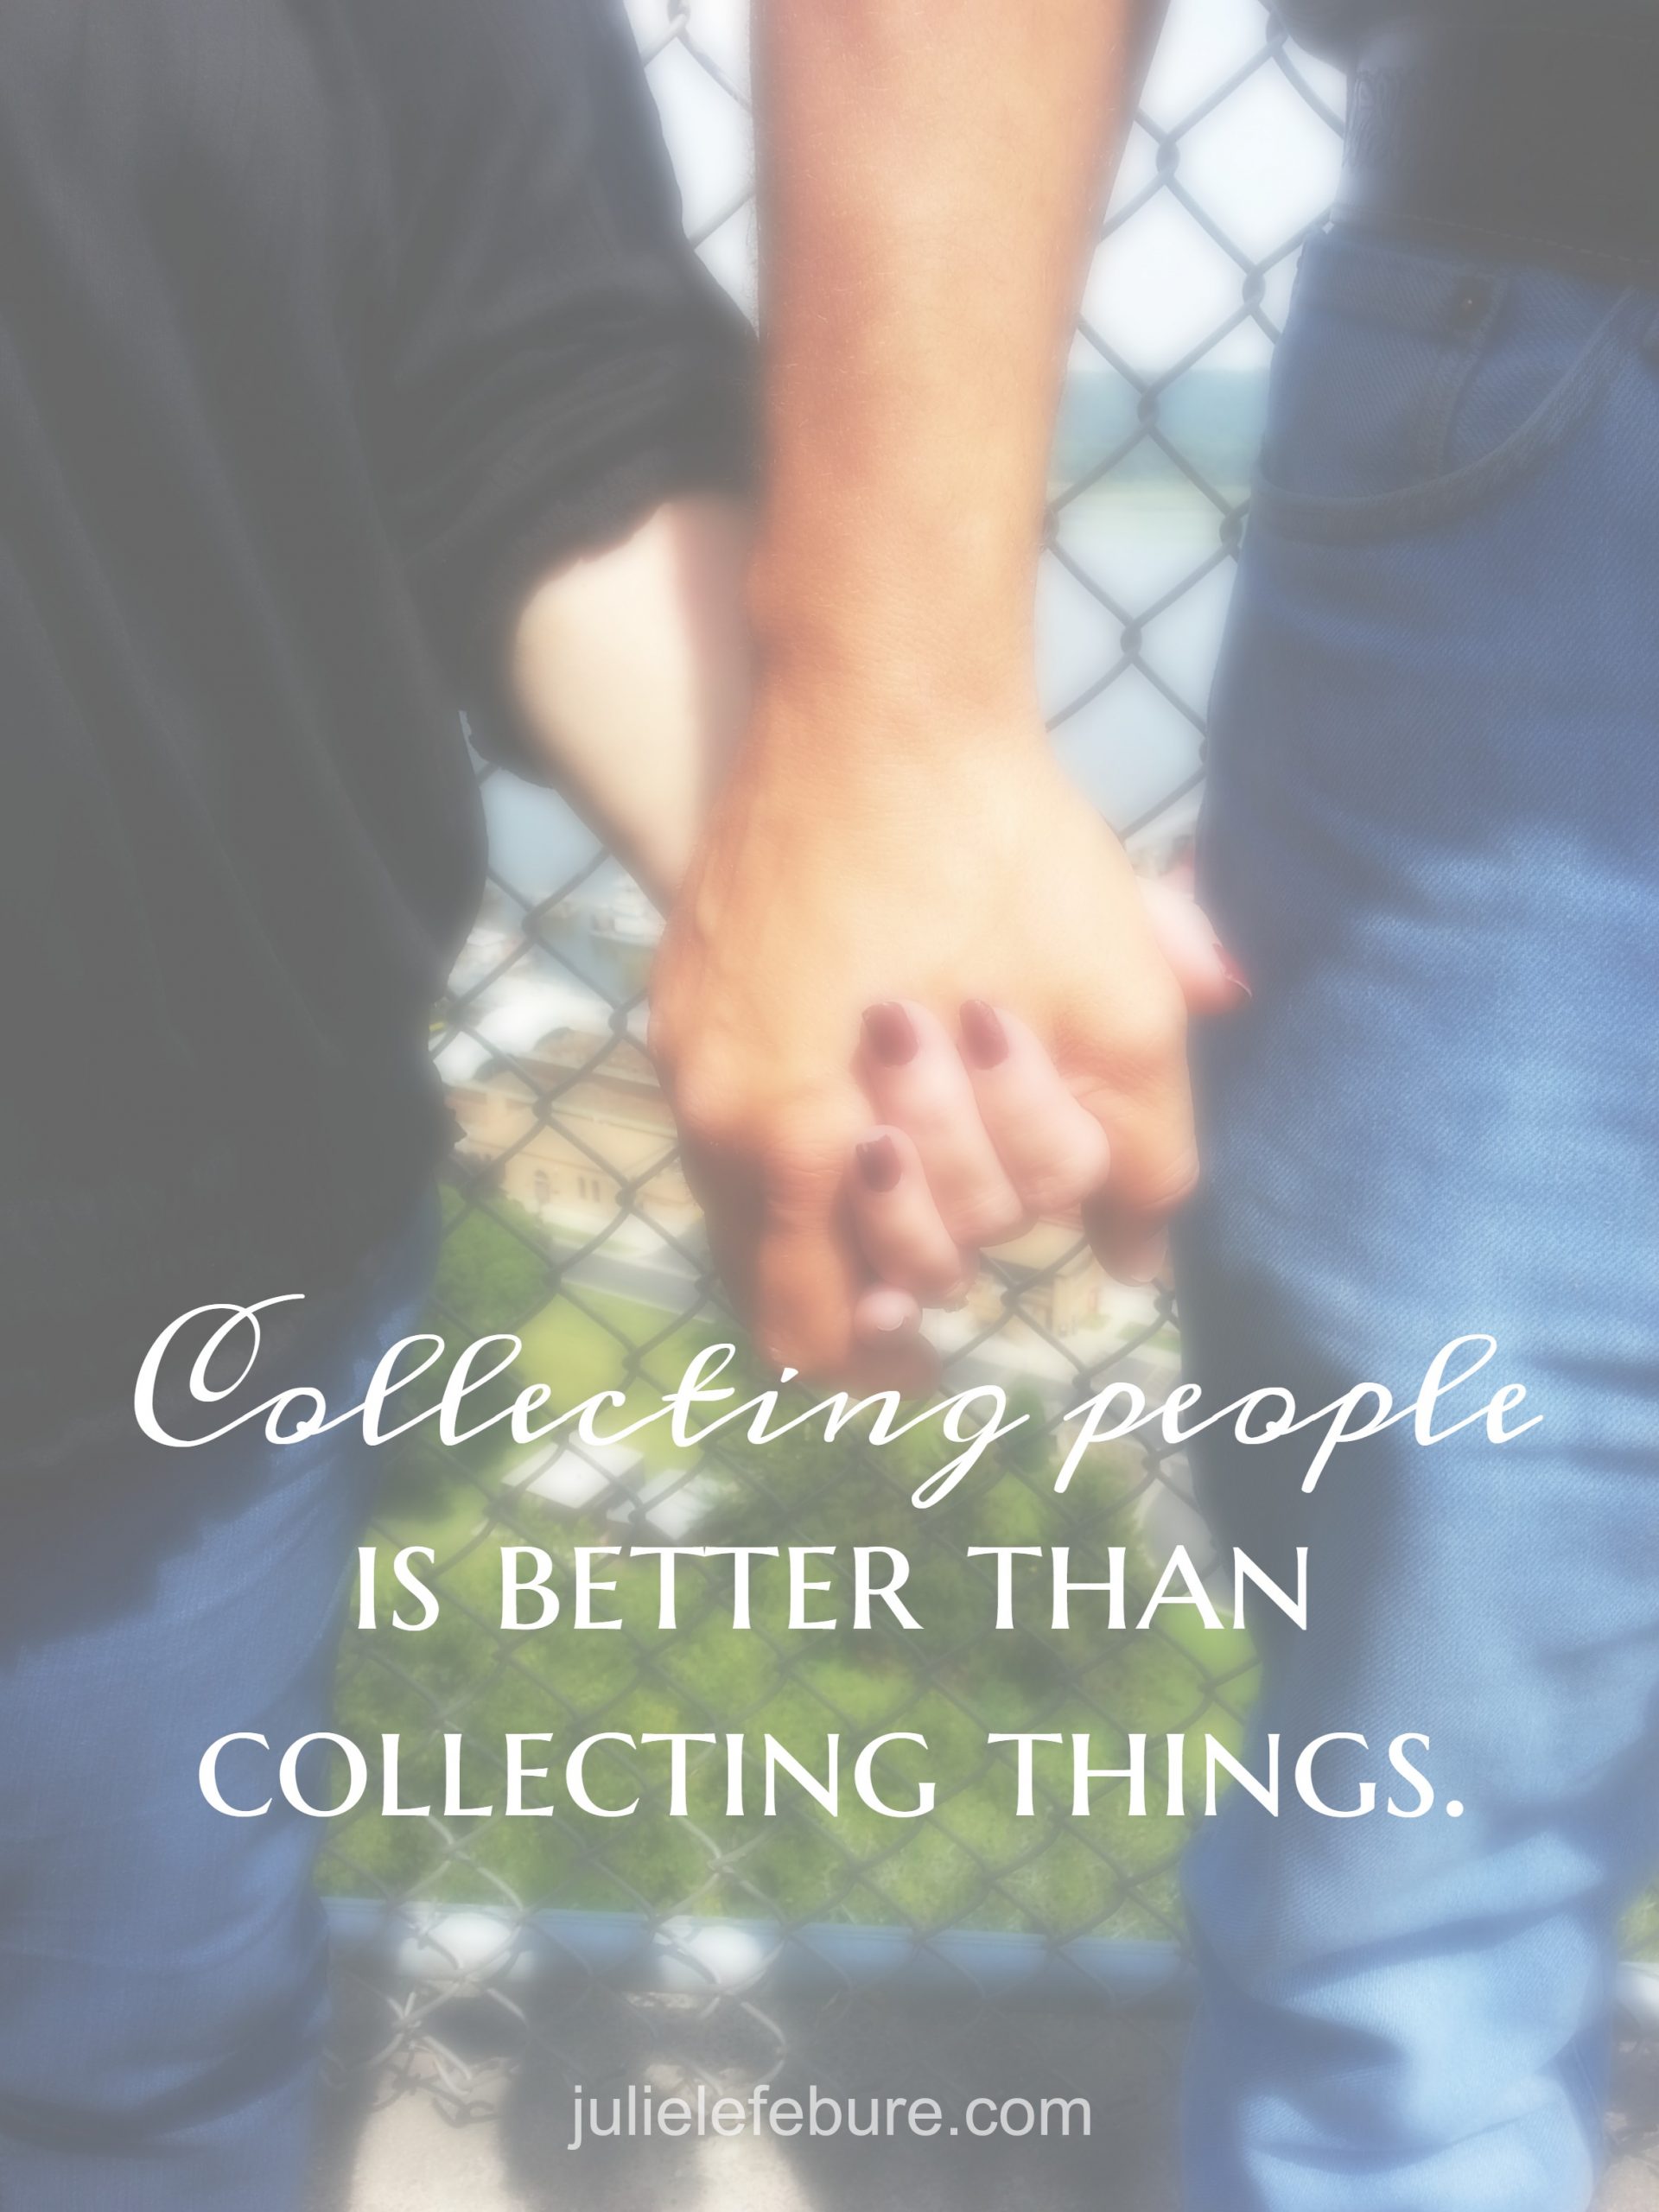 Which Is Better, Collecting People Or Things?